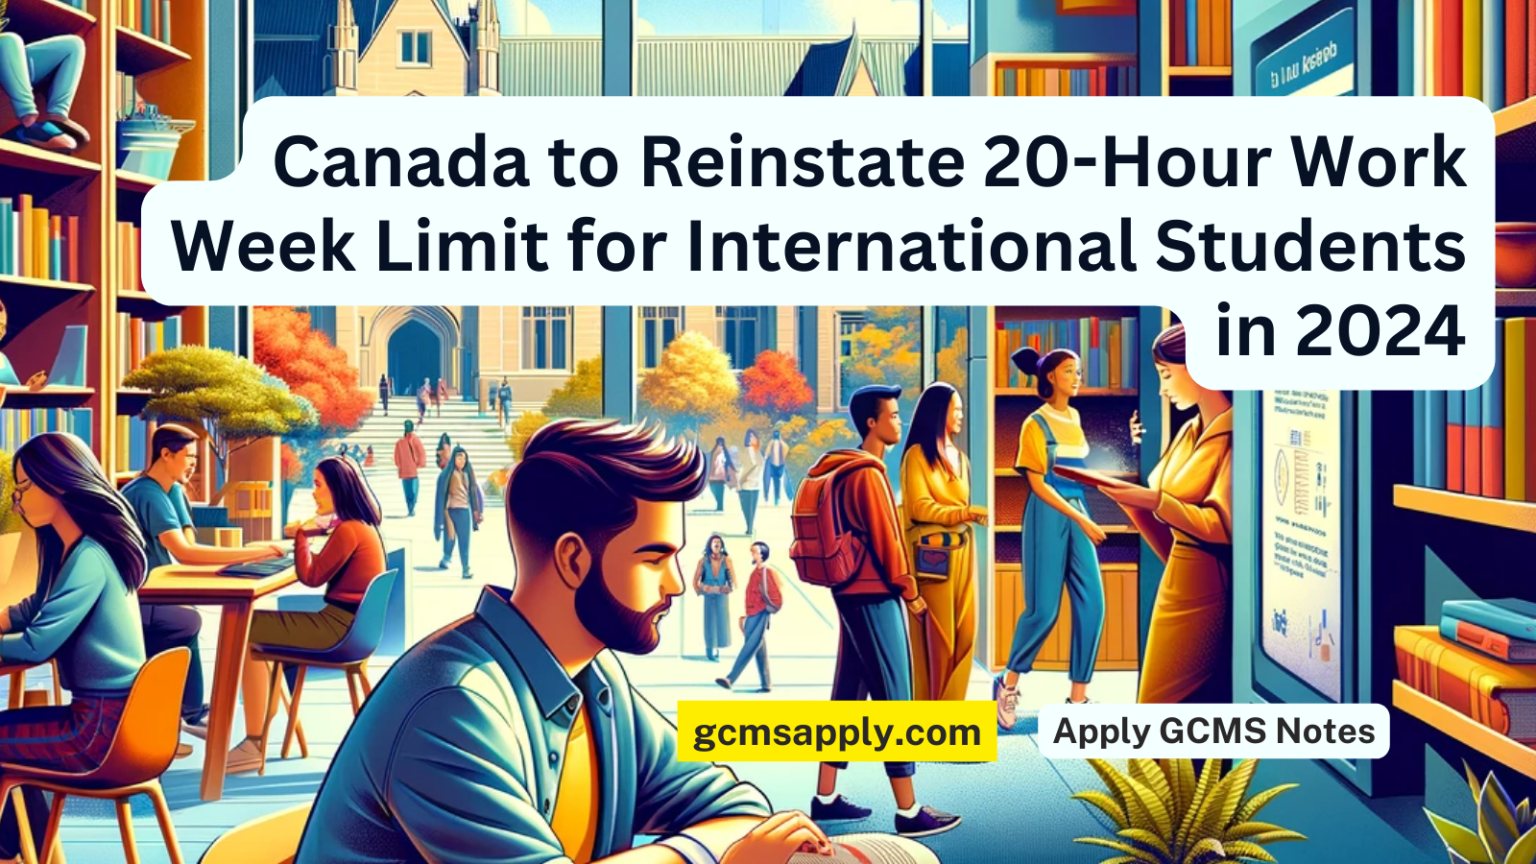 Canada To Reinstate 20 Hour Work Week Limit For International Students In 2024 1536x864 